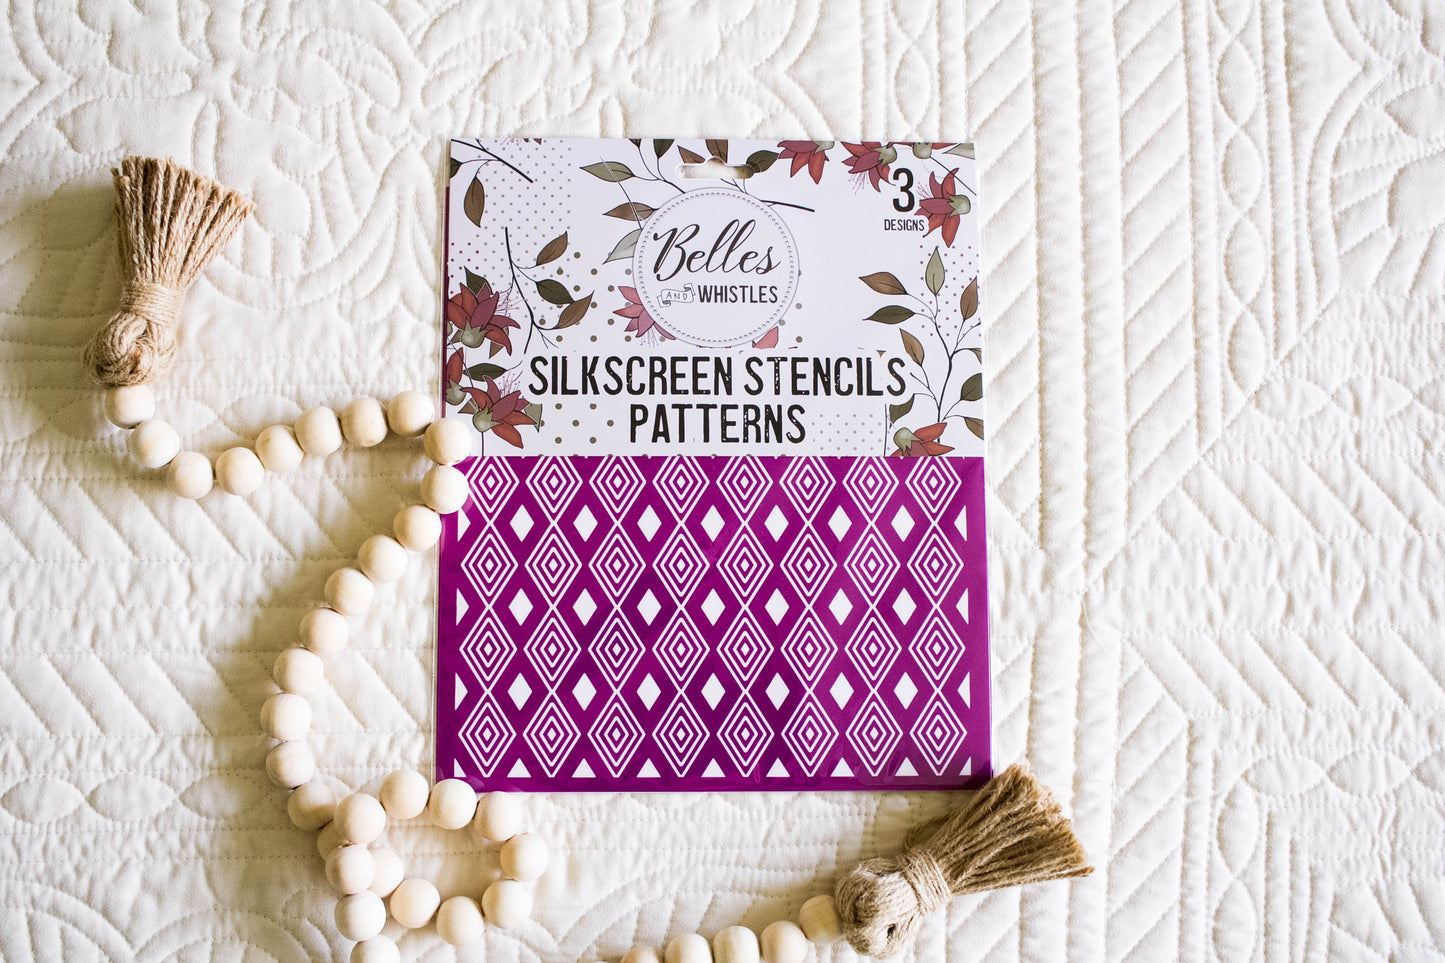 Belles and Whistles Silk Screen Stencils - Patterns